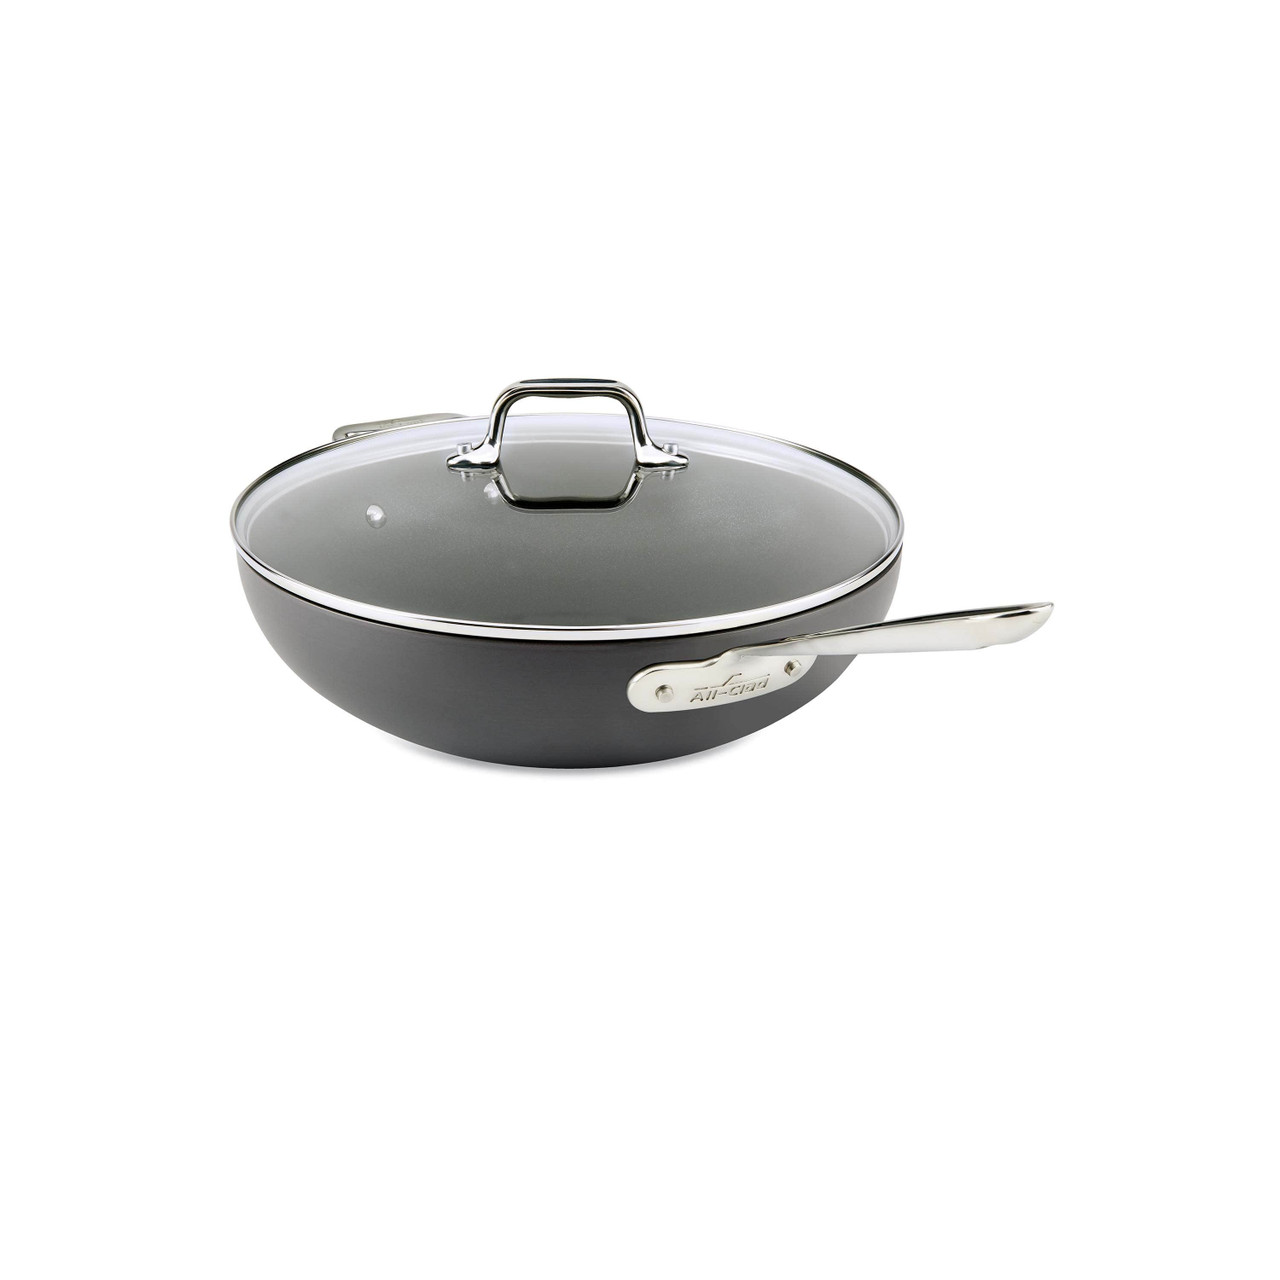 12-Inch Non-Stick Frying Pan with Lid